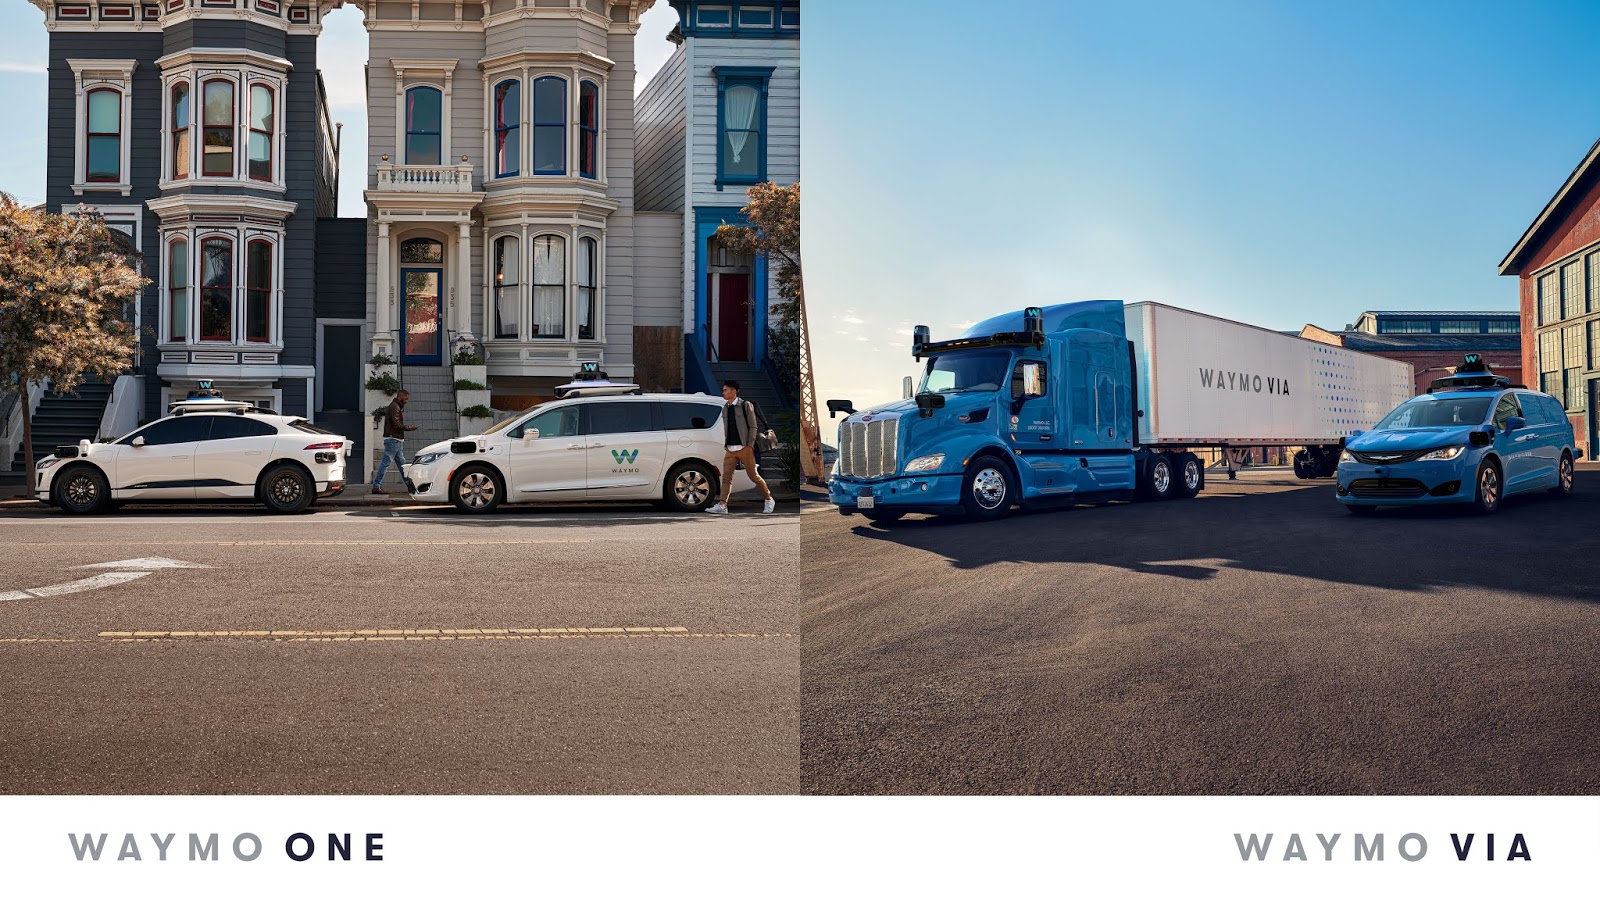 Side by side images of Waymo's Waymo One fleet, complete with a white I-PACE and Pacifica mini van, and Waymo Via fleet, featuring a blue Peter Bilt truck and Pacifica mini van